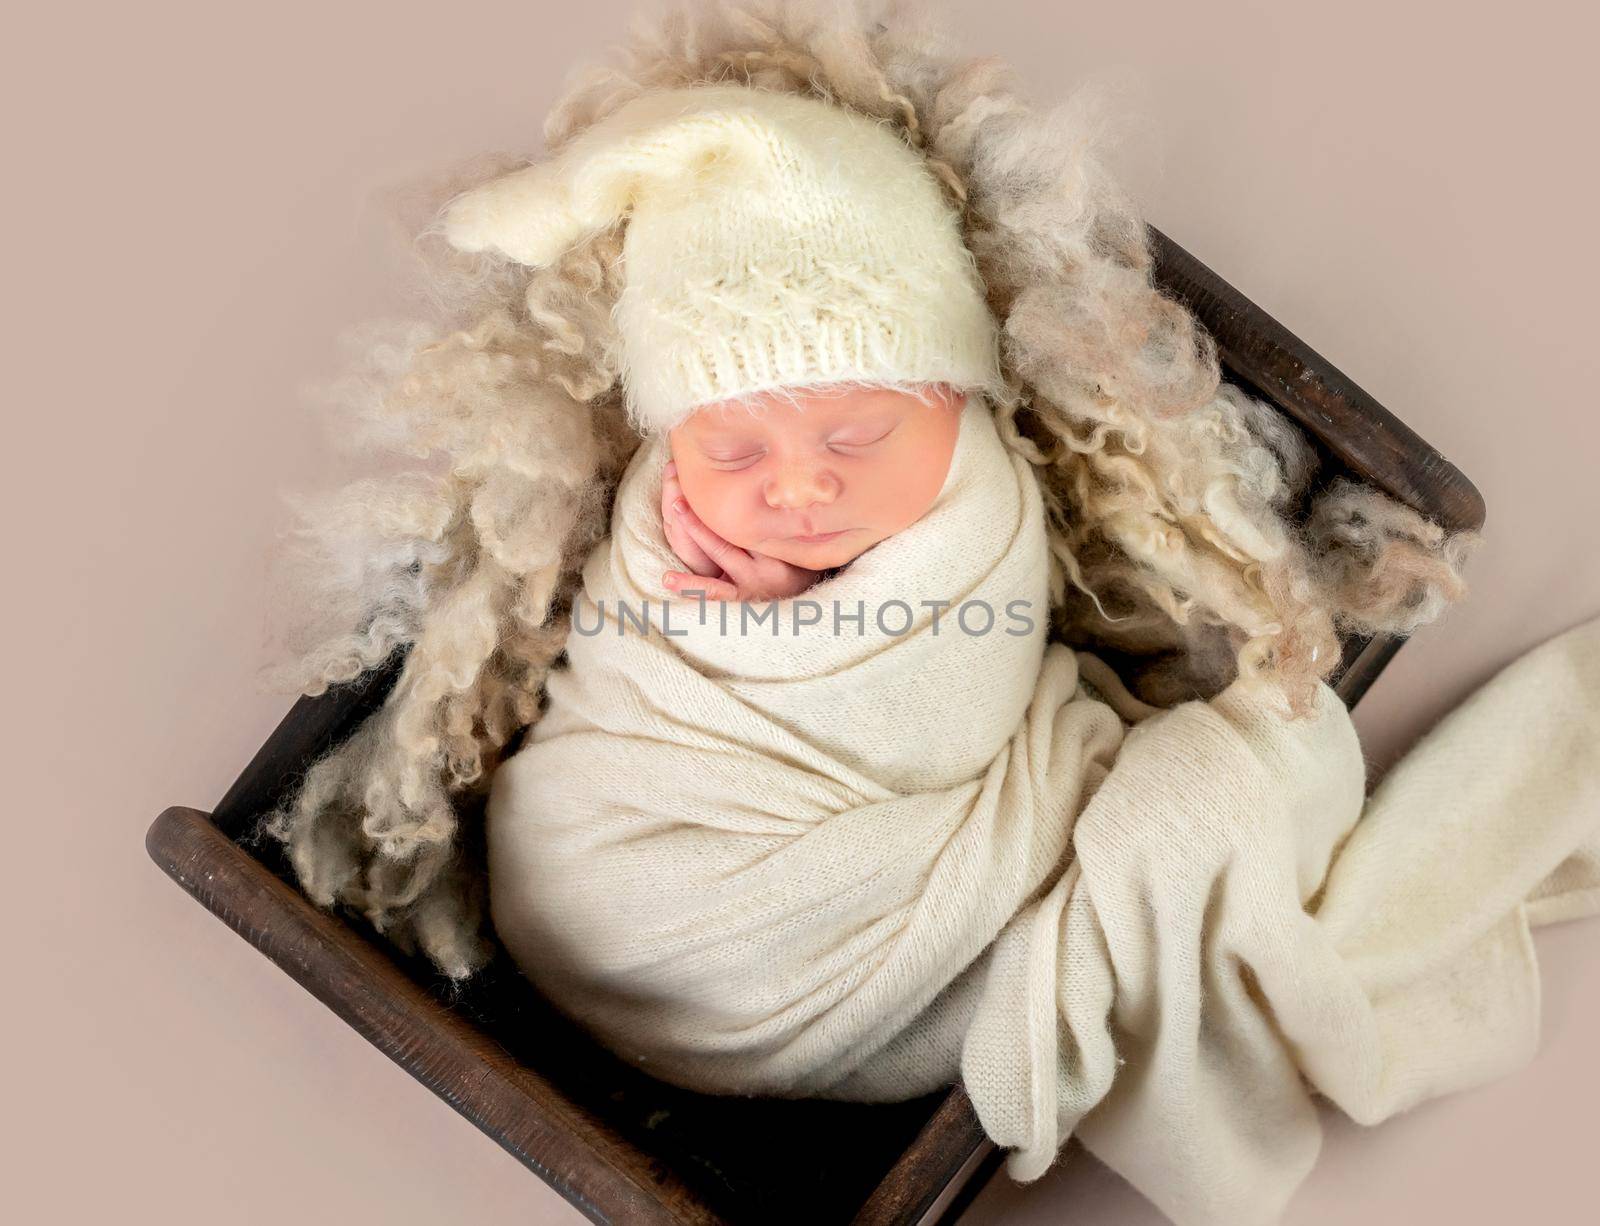 Cute little baby in hat sweetly sleeping in small bed covered in blanket